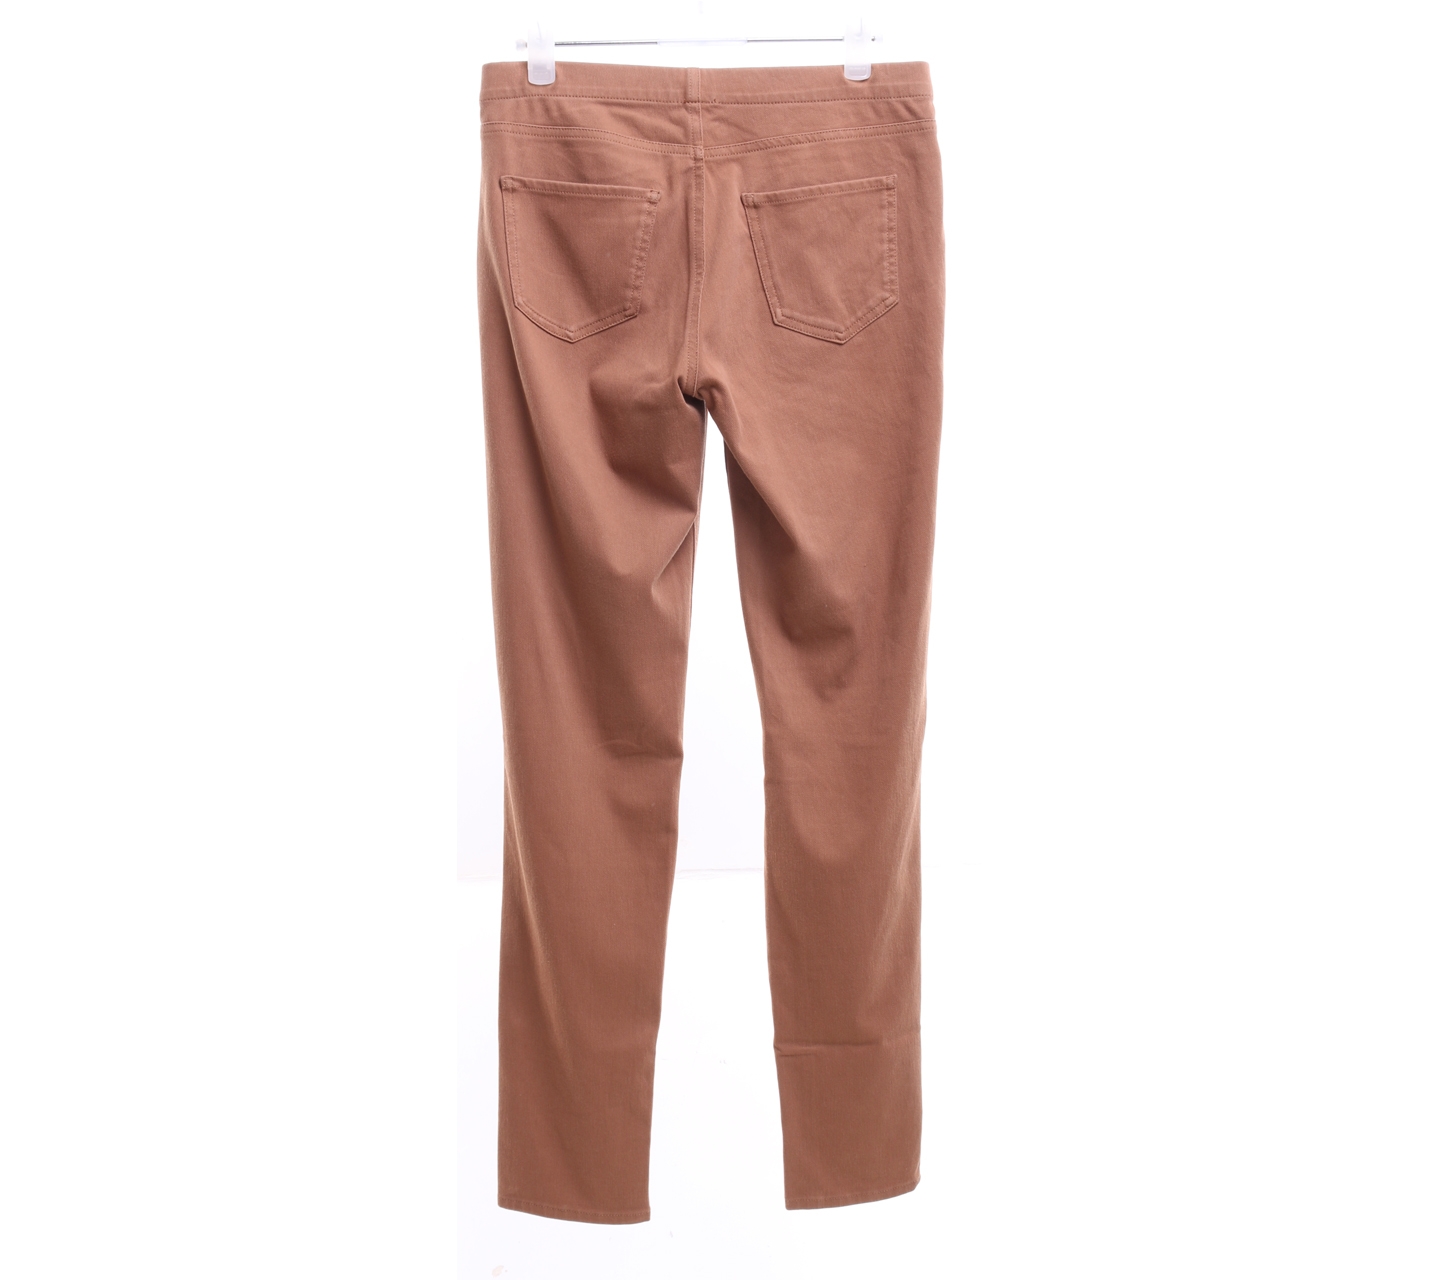 Uniqlo Brown Jegging Long Pants